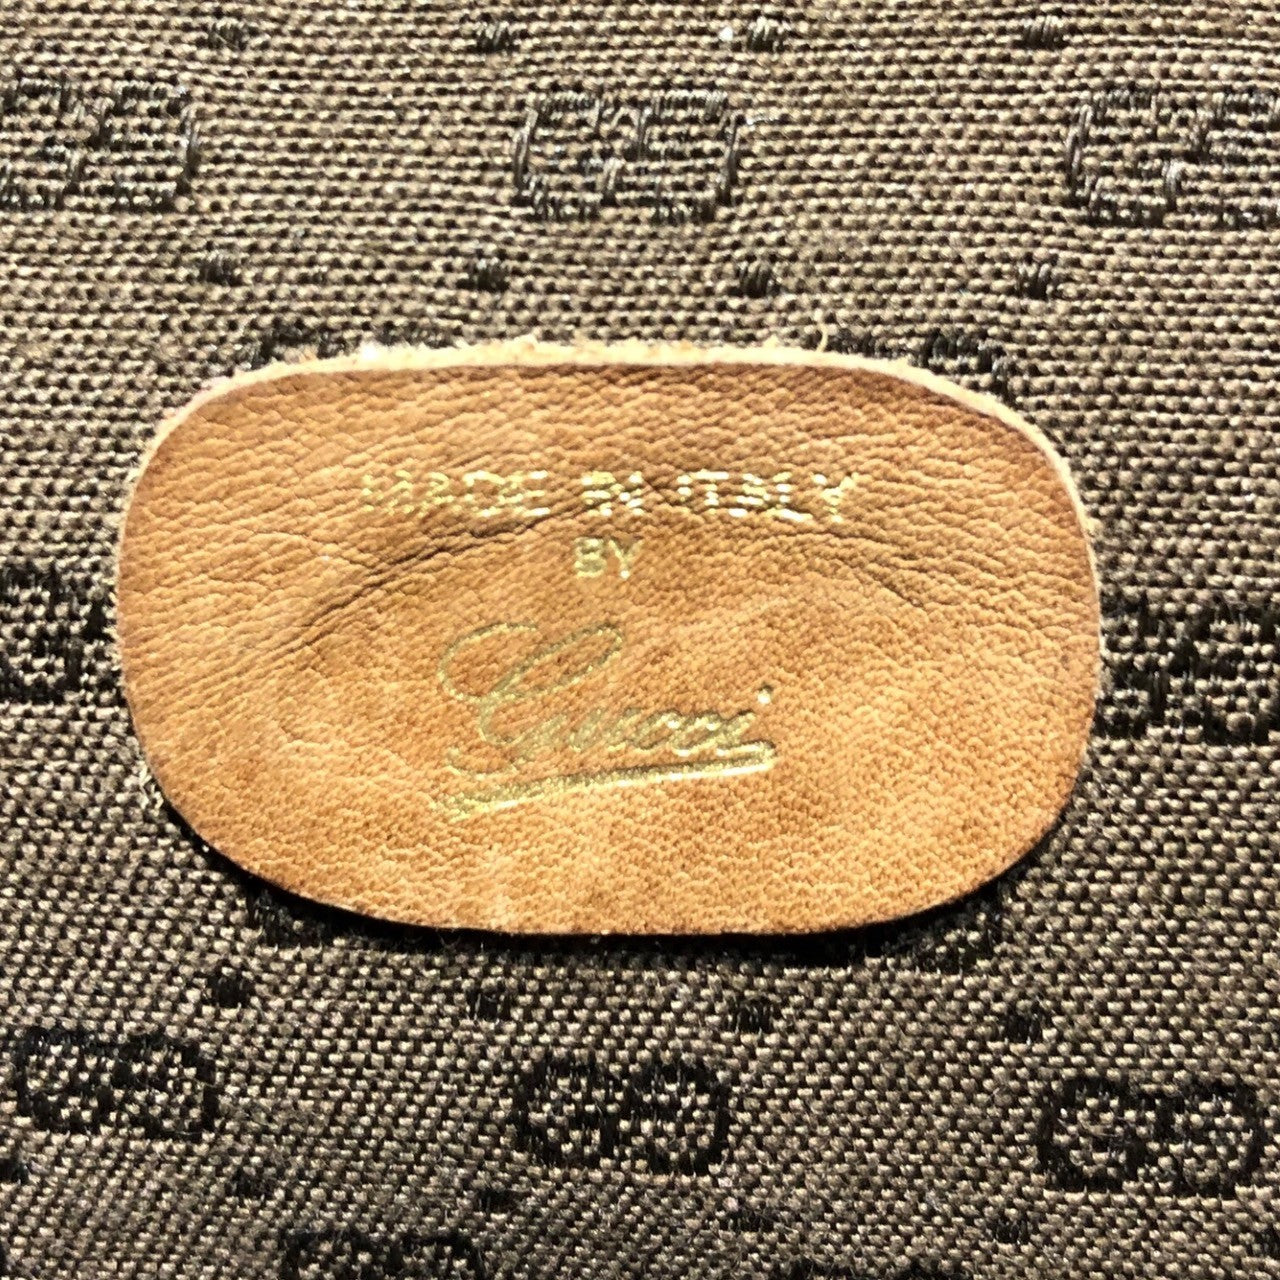 GUCCI(グッチ) 80's GG logo compact chain shoulder bag ロゴ コンパクト チェーン ショルダー バッグ ブラウン OLD GUCCI 80年代 ヴィンテージ